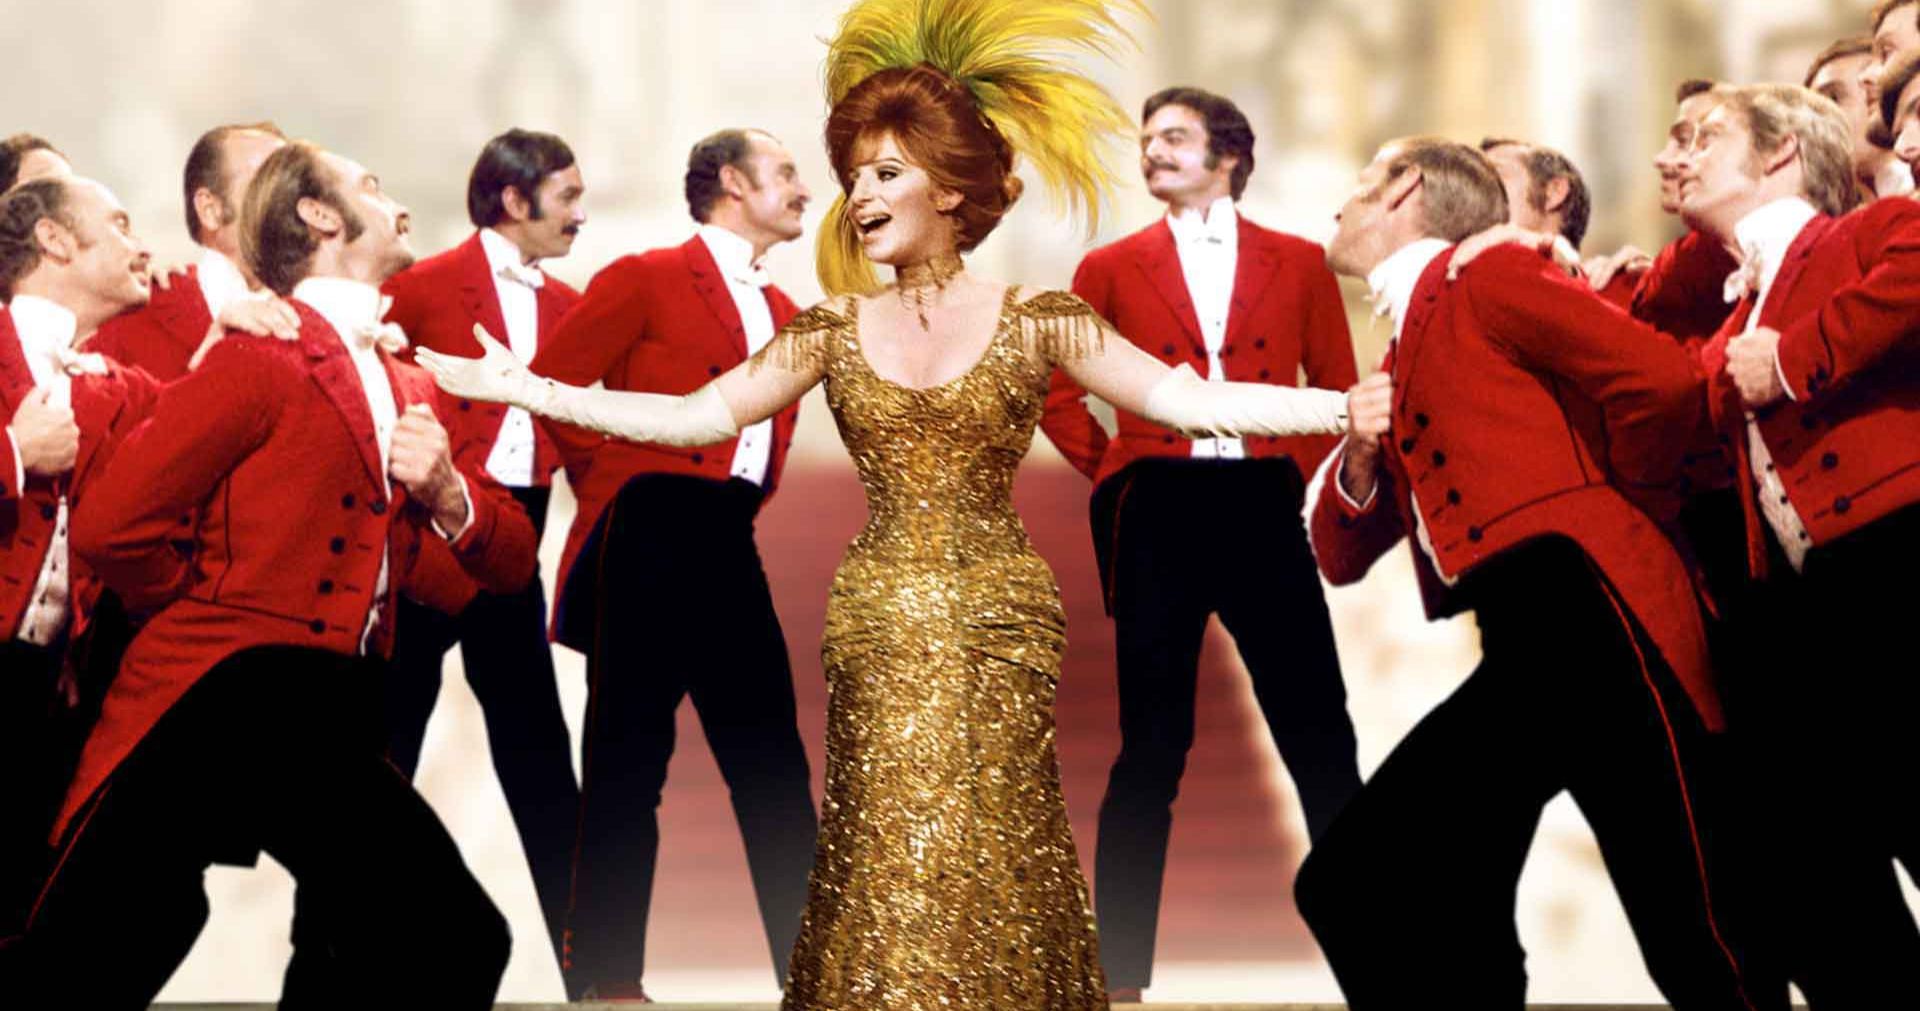 Barbra Streisand's Hello, Dolly! Comes Back to Theaters for 50th Anniversary